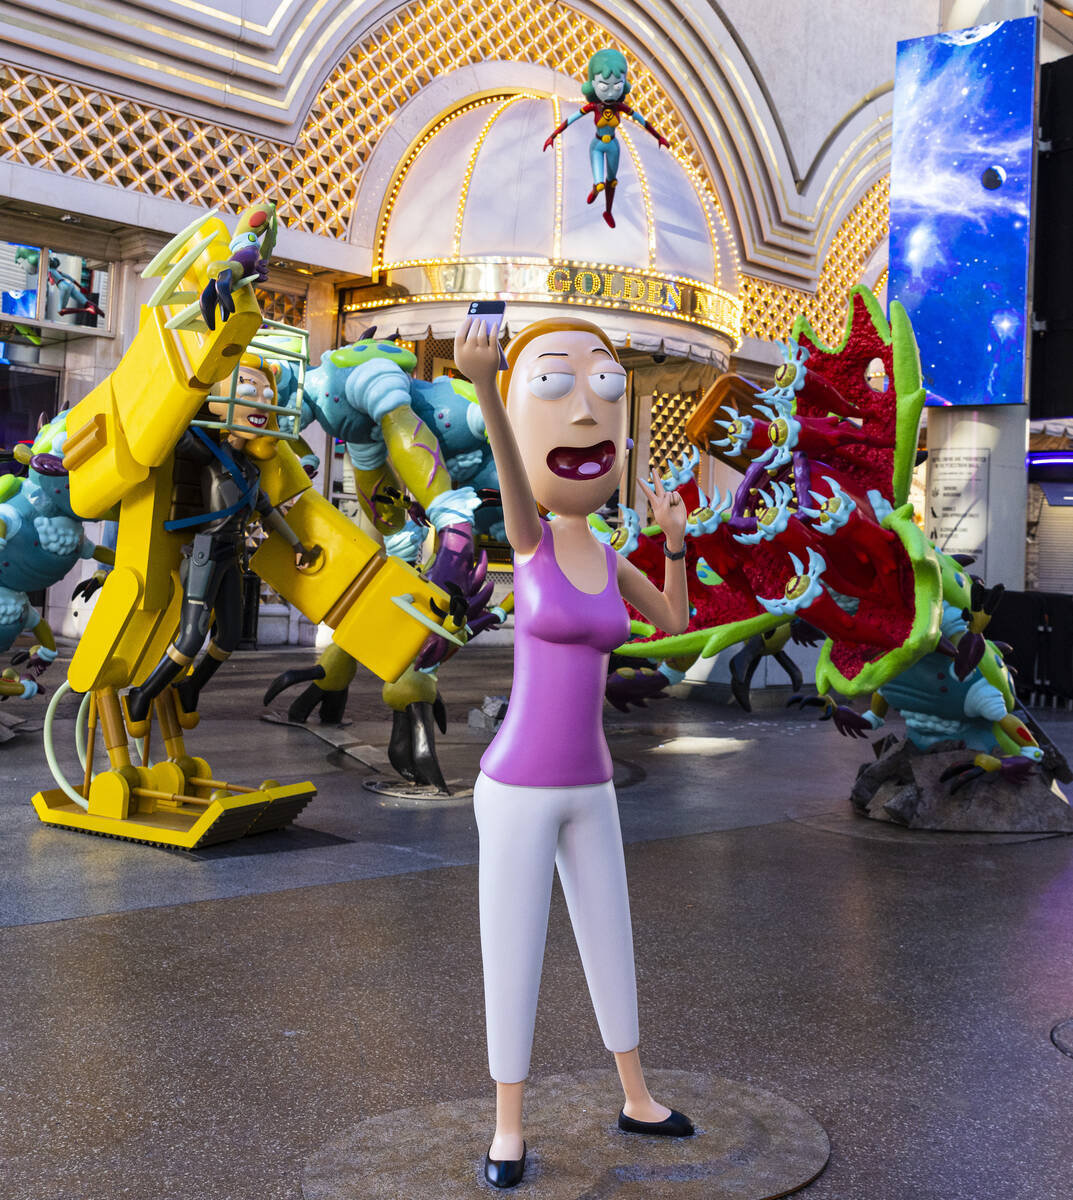 Figures of characters from the Adult Swim TV show "Rick and Morty," Space Beth, Plane ...